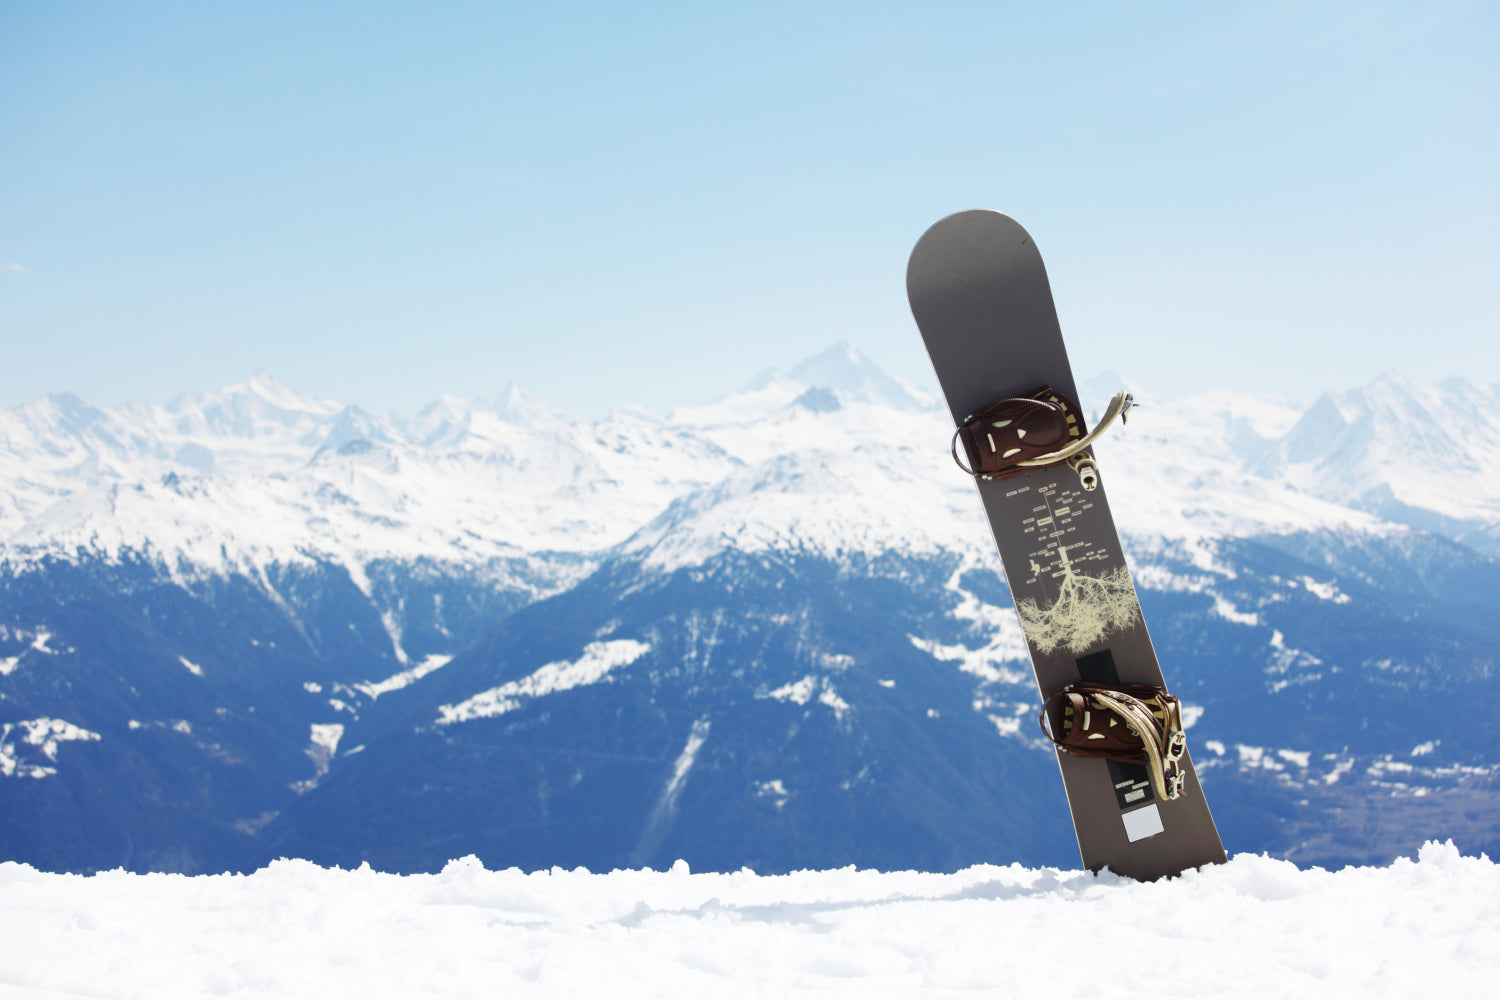 How To Snowboard: A Beginner's Guide